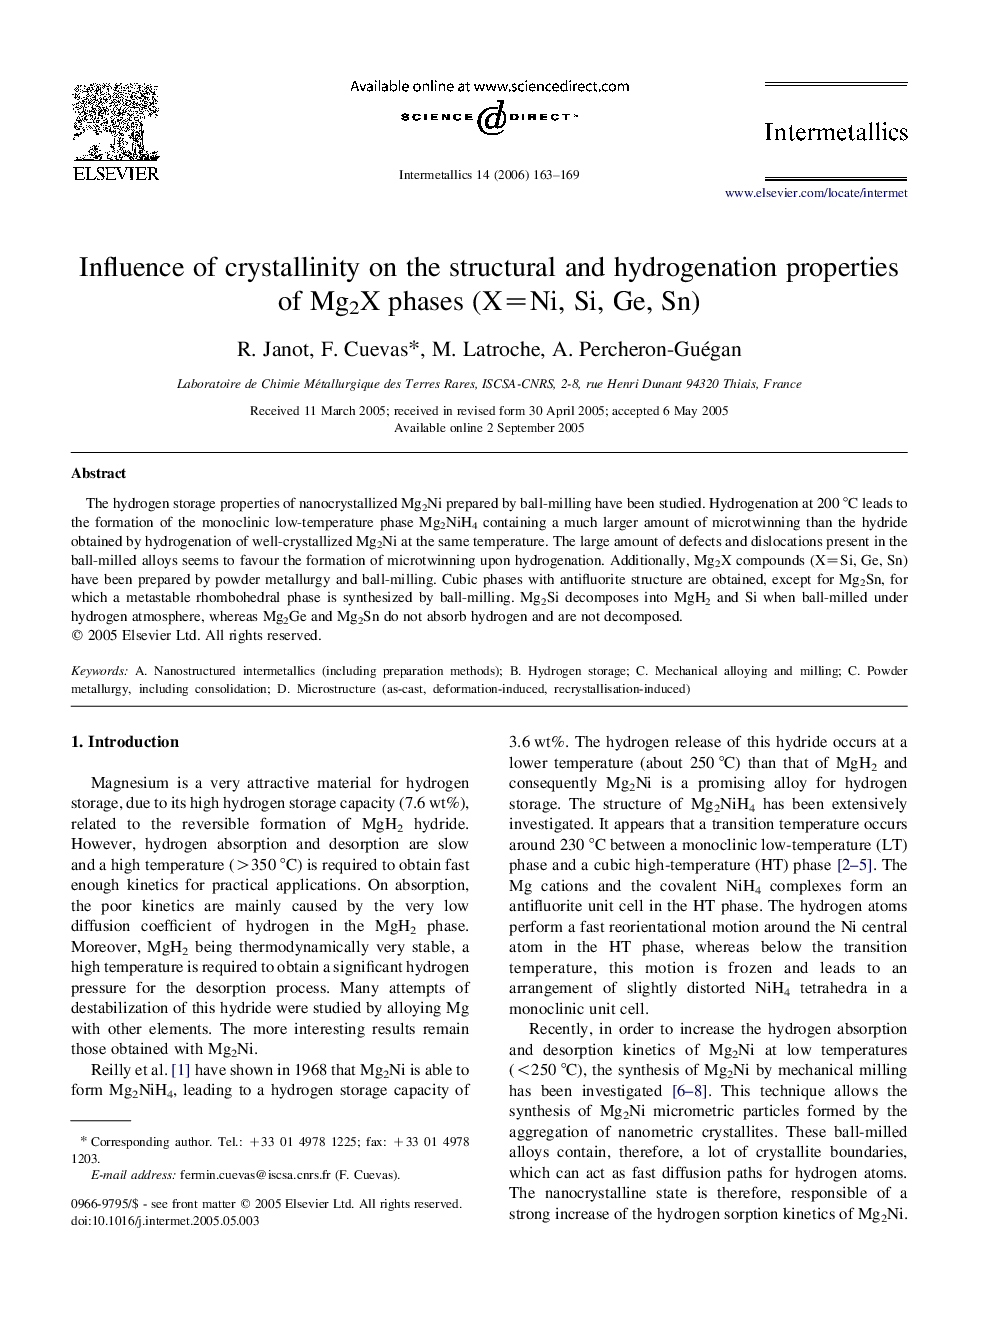 Influence of crystallinity on the structural and hydrogenation properties of Mg2X phases (X=Ni, Si, Ge, Sn)